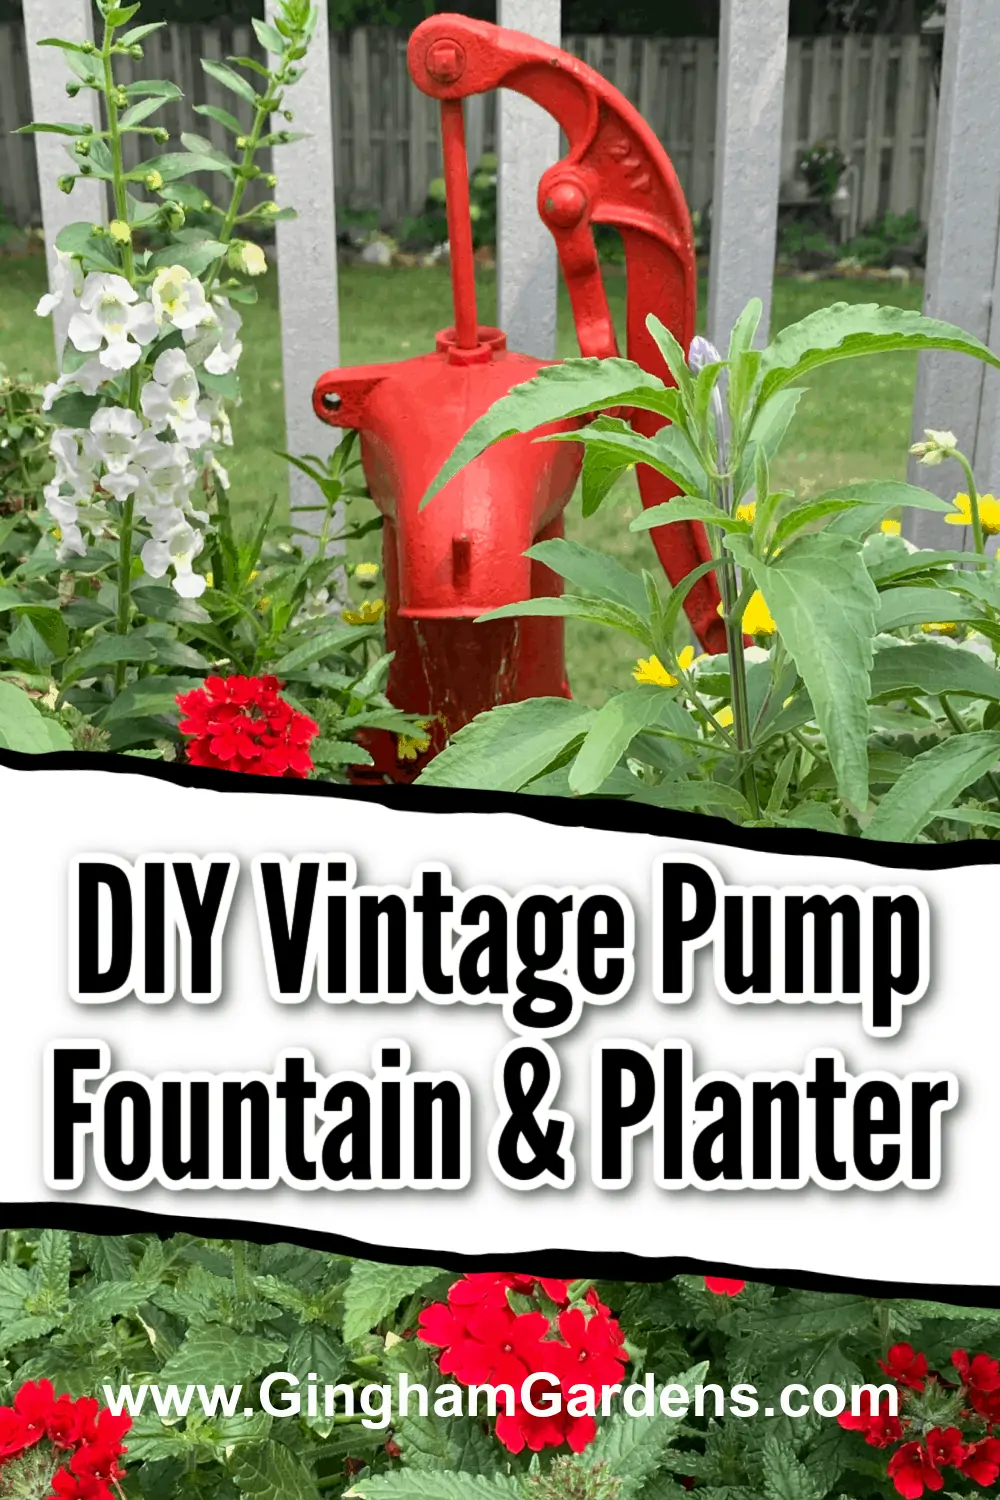 Image of a red vintage pump in a planter with text overlay - DIY Vintage Pump Fountain & Planter